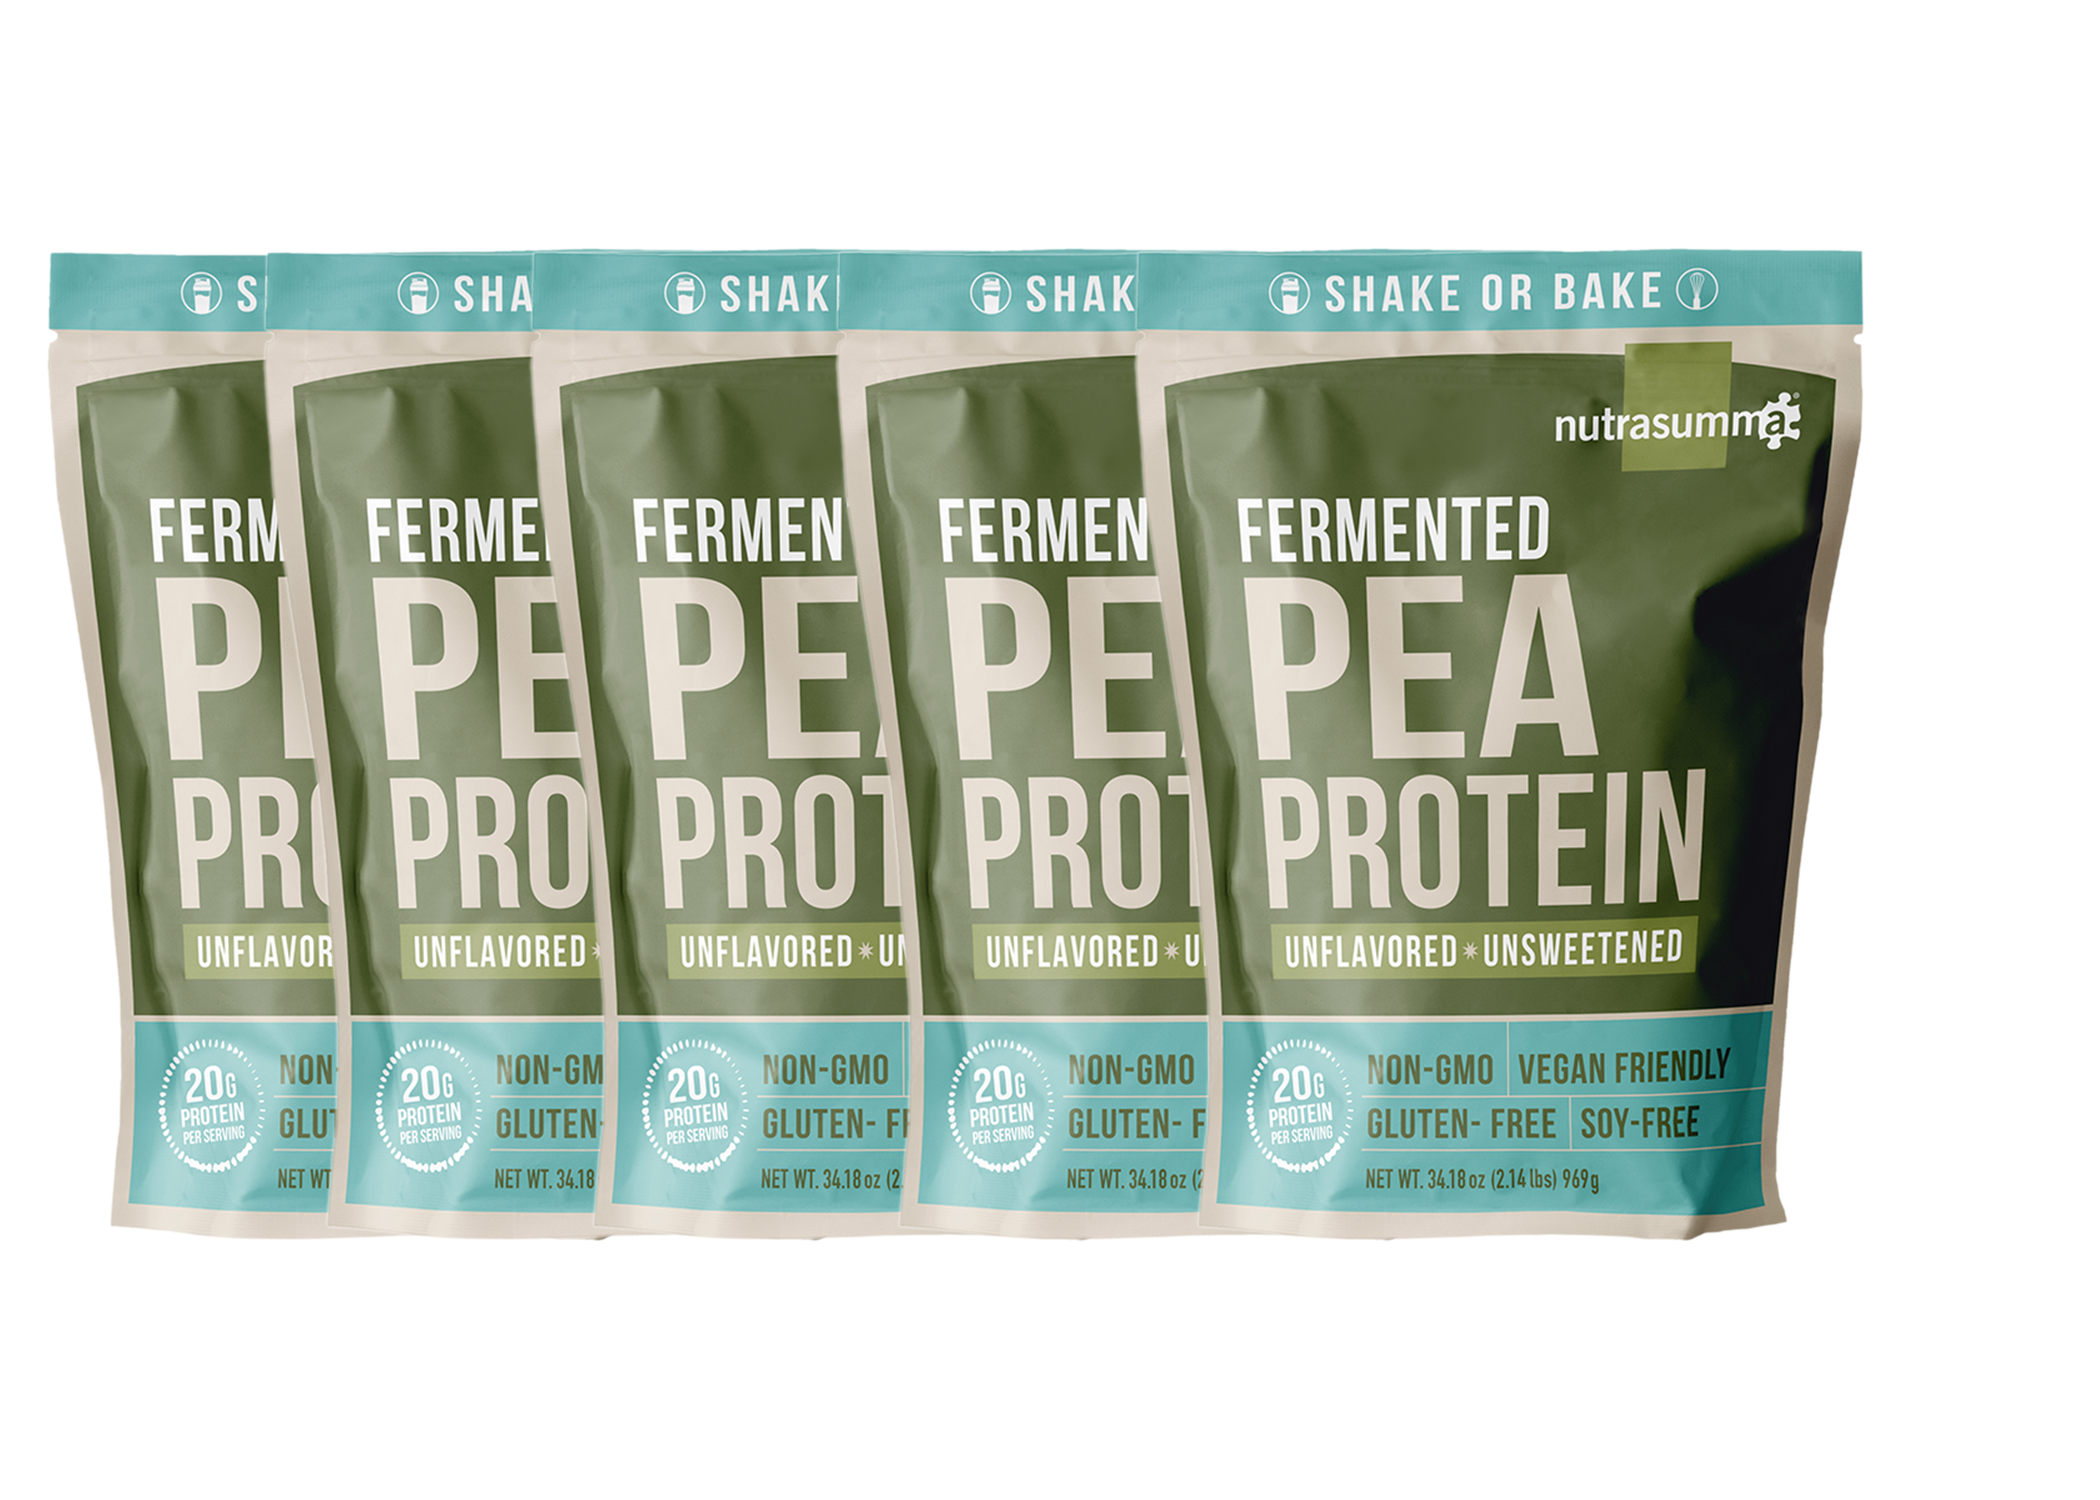 Fermented Pea Protein 10lb Box - Unflavored & Unsweetened